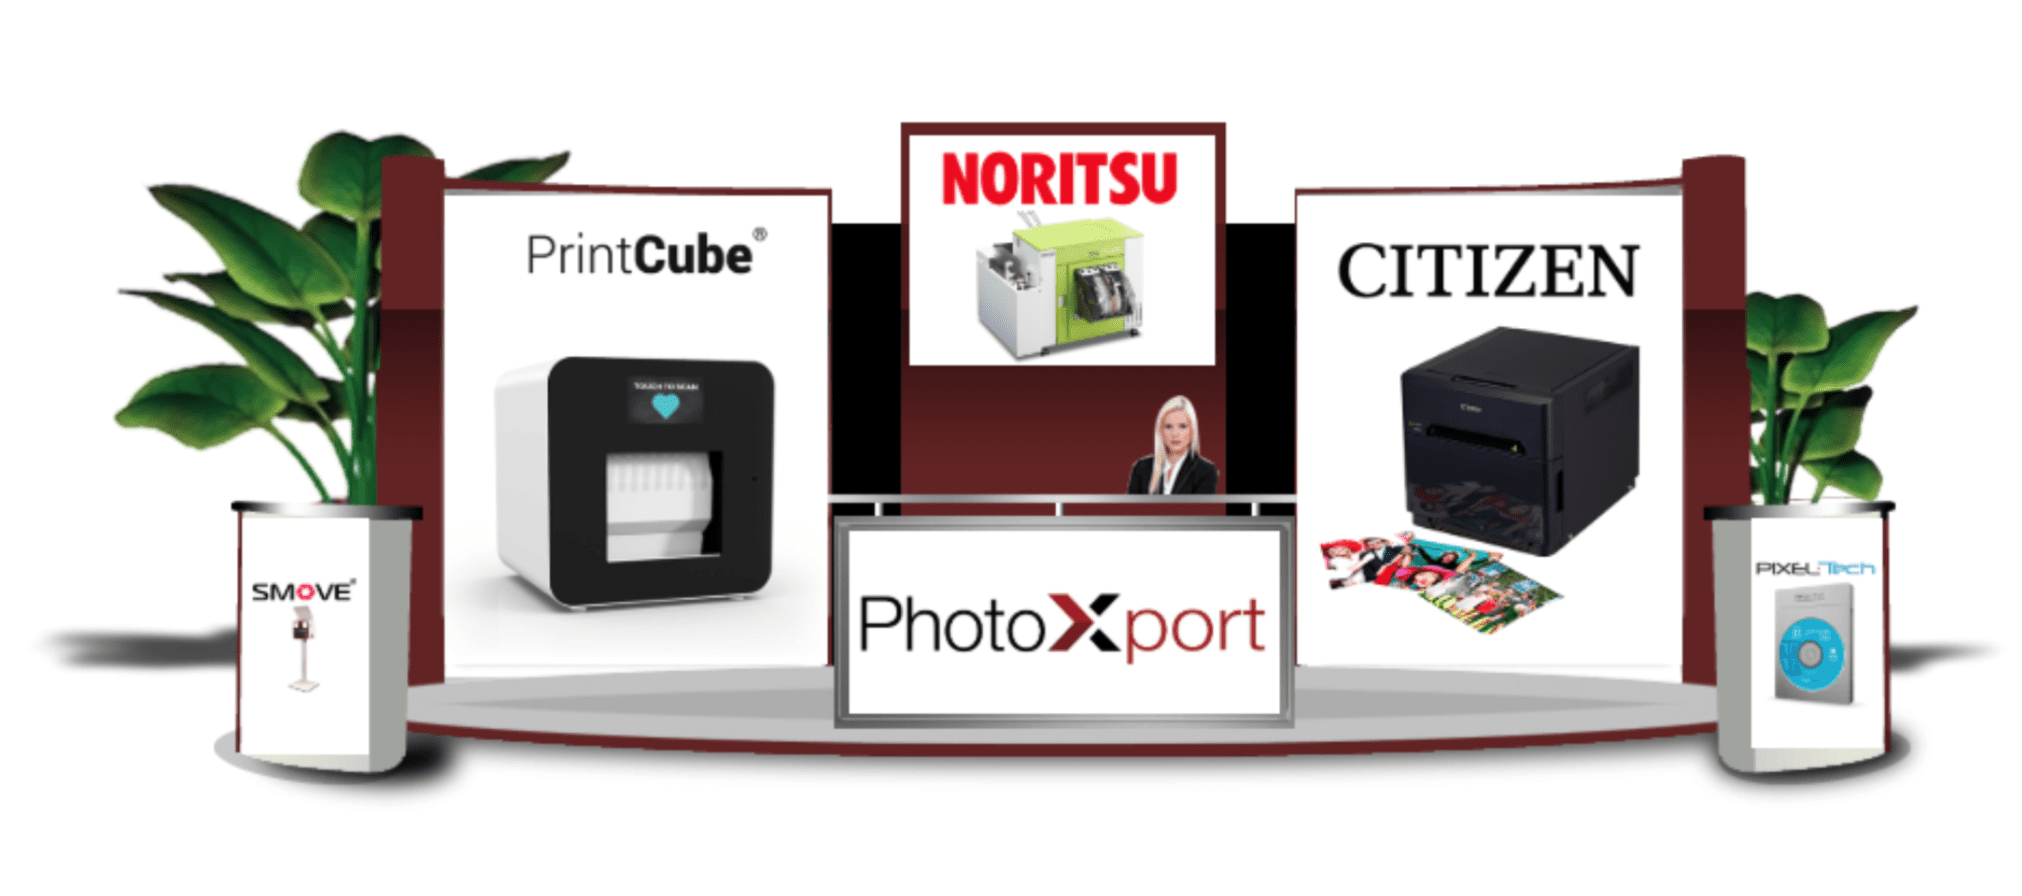 Photoxport at the Virtual Photography Show 2020